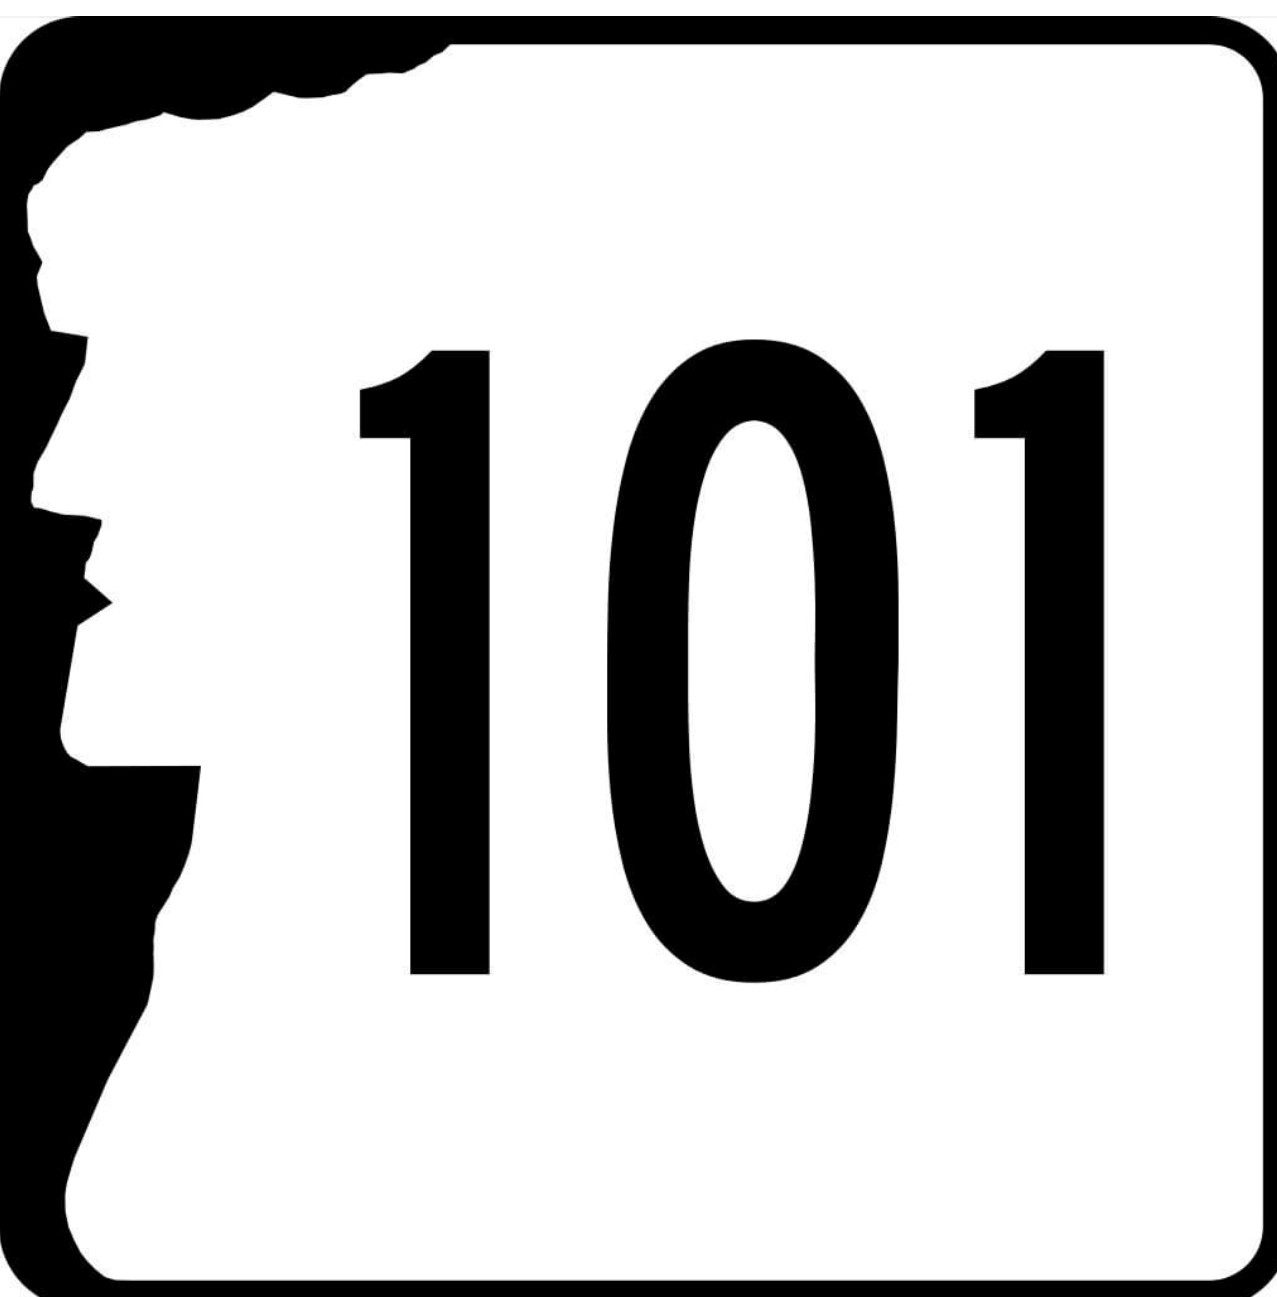 This is the image for the Route 101 sign. It is the number 101 in large black sans serif lettering. This image is featured by Nashua, New Hampshire, auto accident law firm Buckley Law Offices.